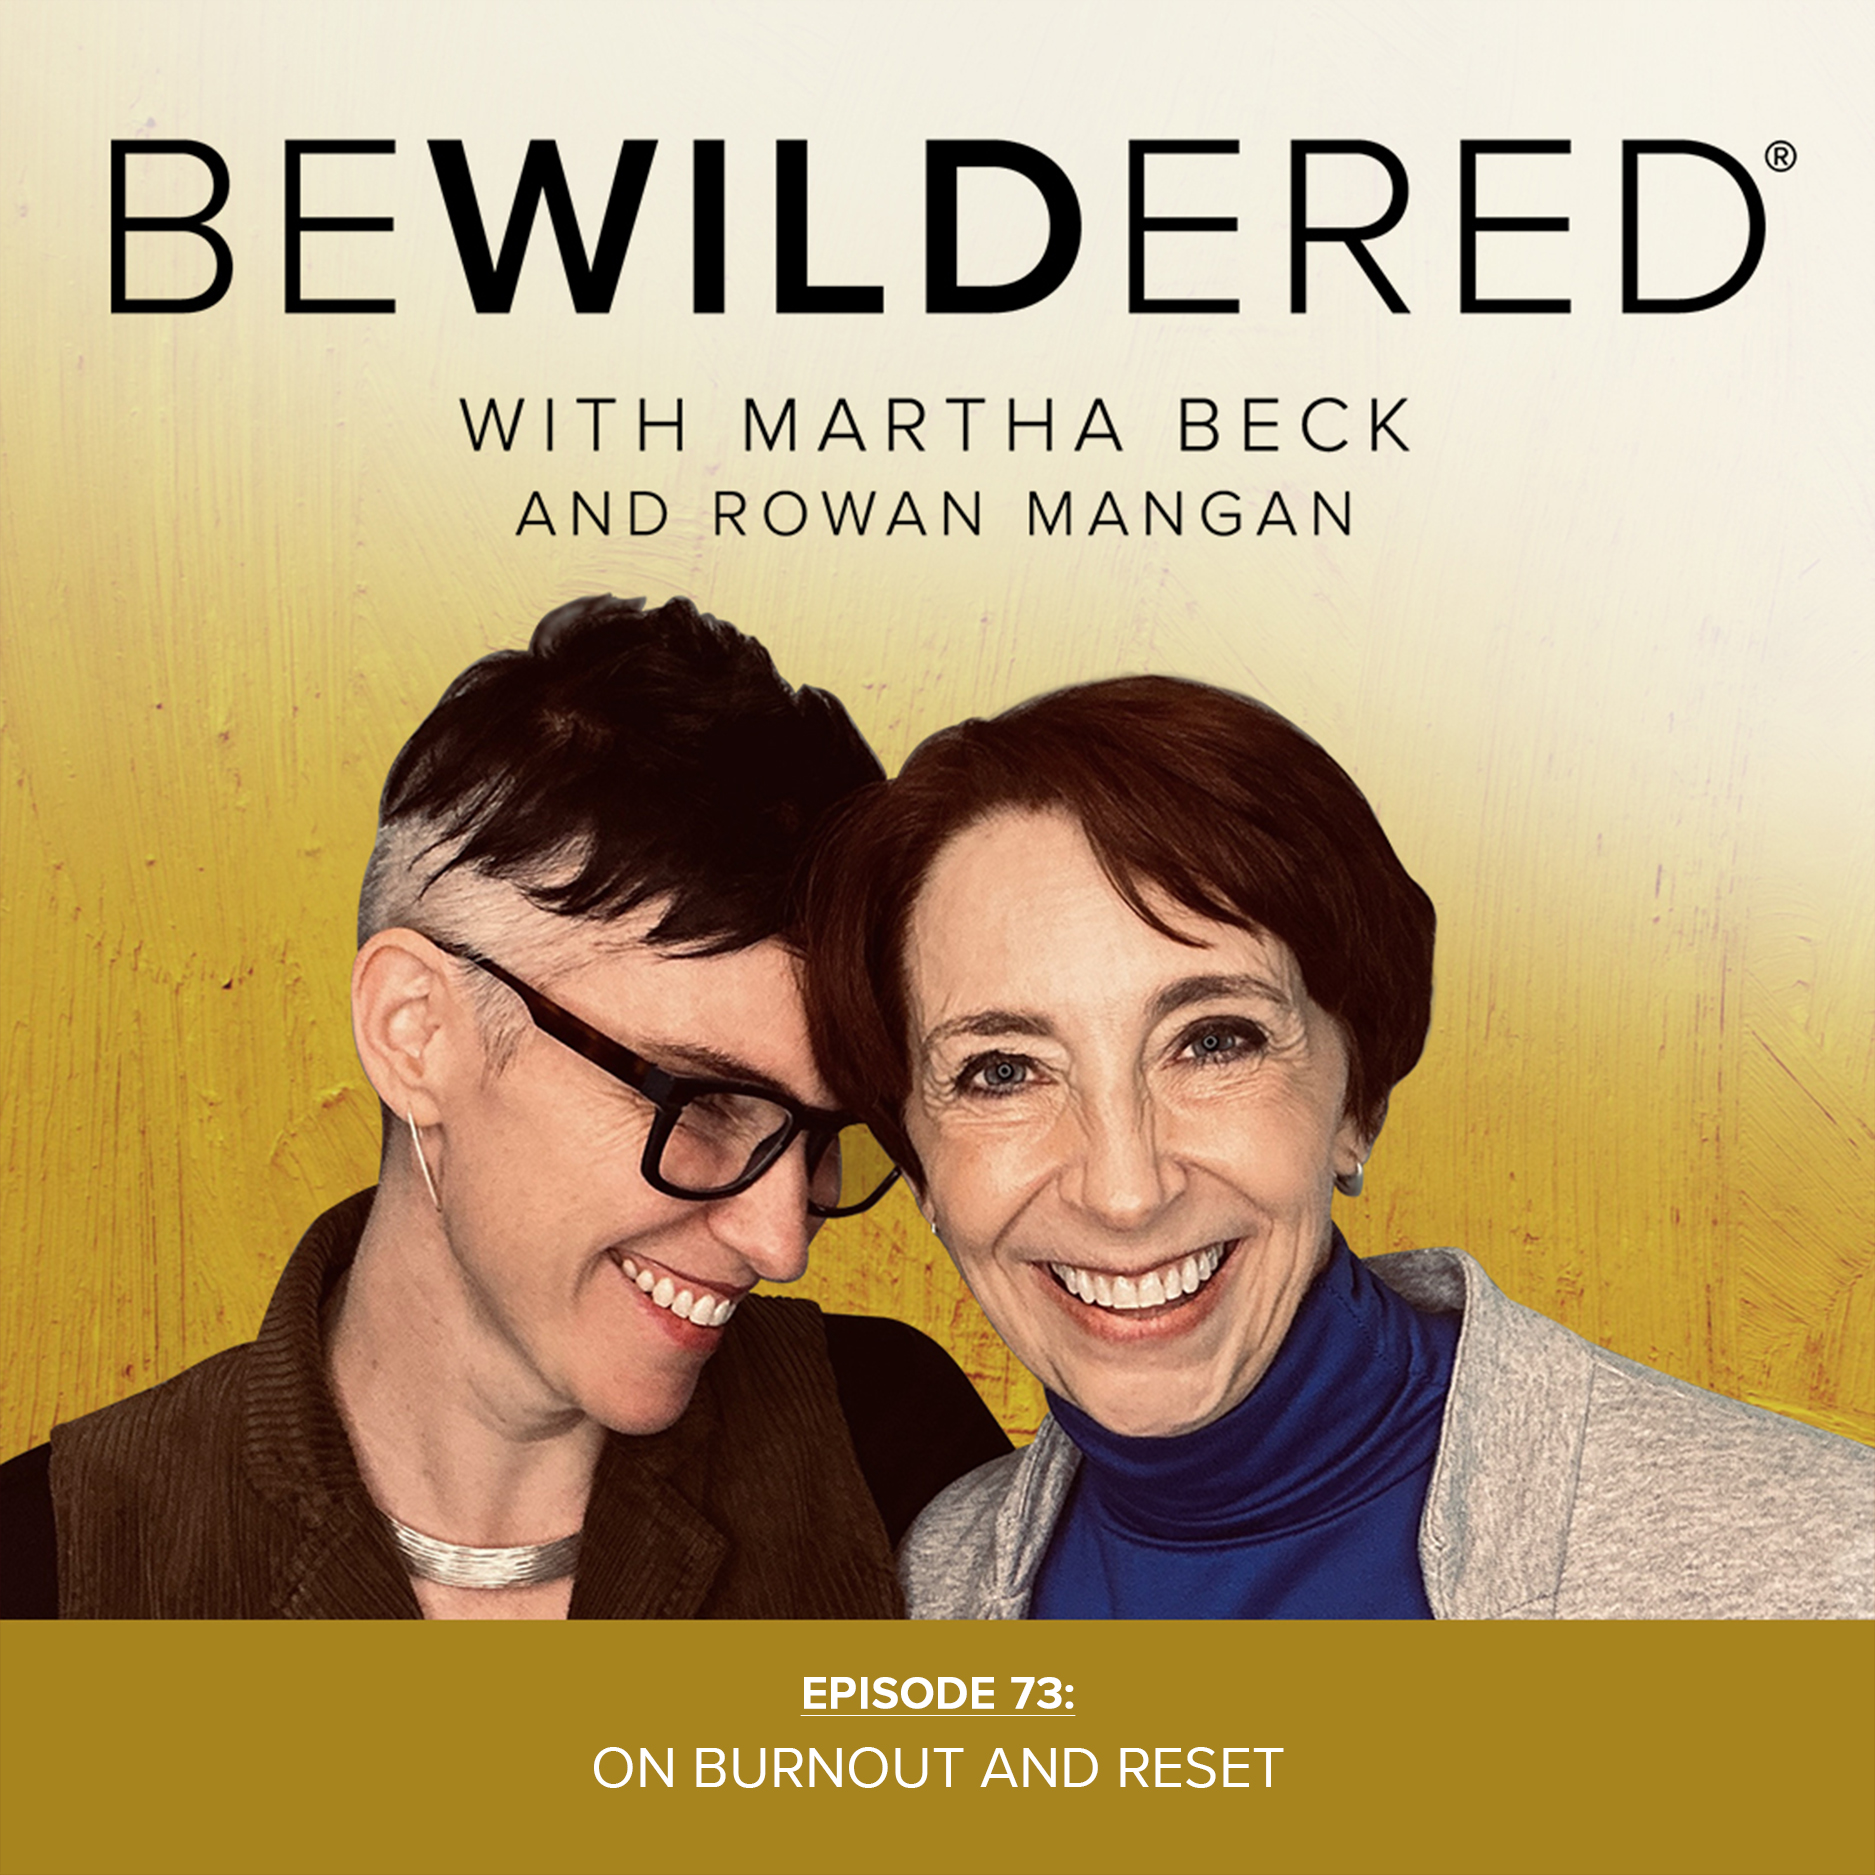 Image for Episode #73 On Burnout and Reset for the Bewildered Podcast with Martha Beck and Rowan Mangan